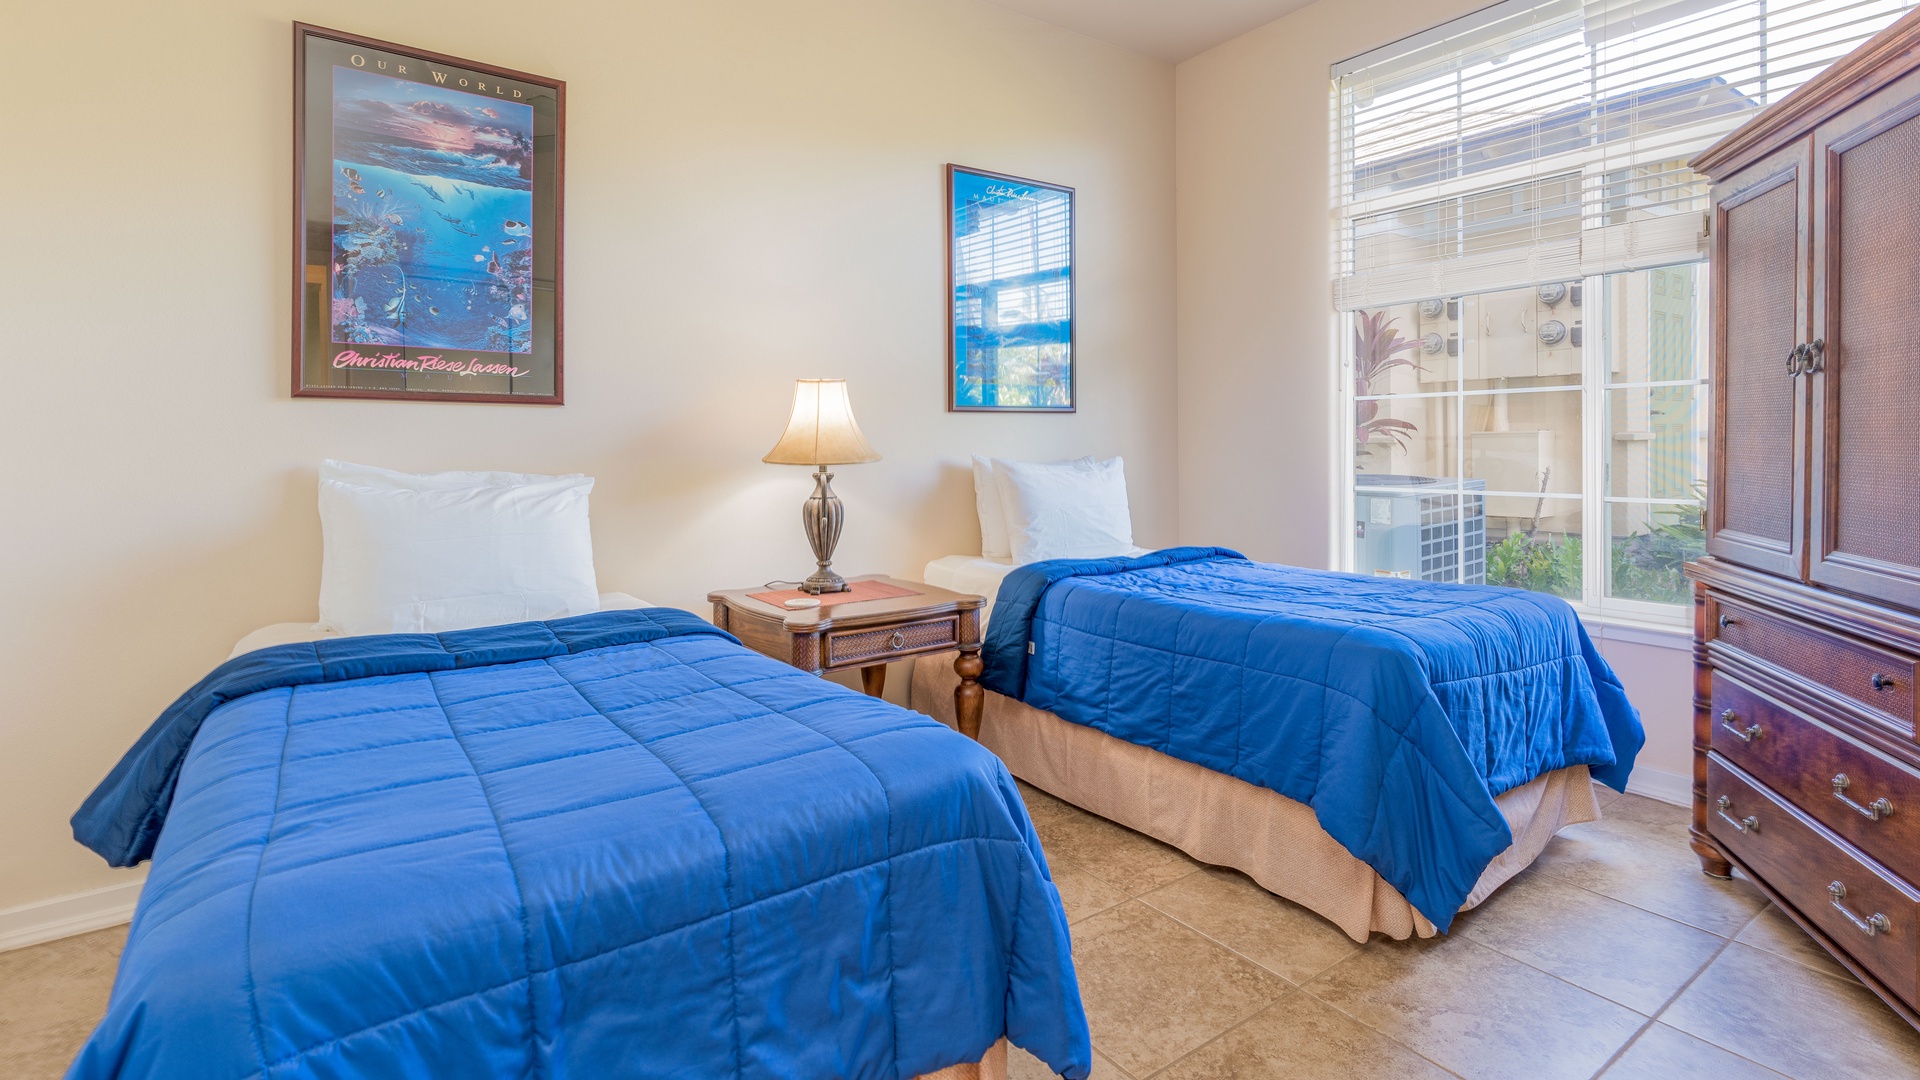 Kapolei Vacation Rentals, Kai Lani 8B - The third guest bedroom with twin beds and vibrant colors.